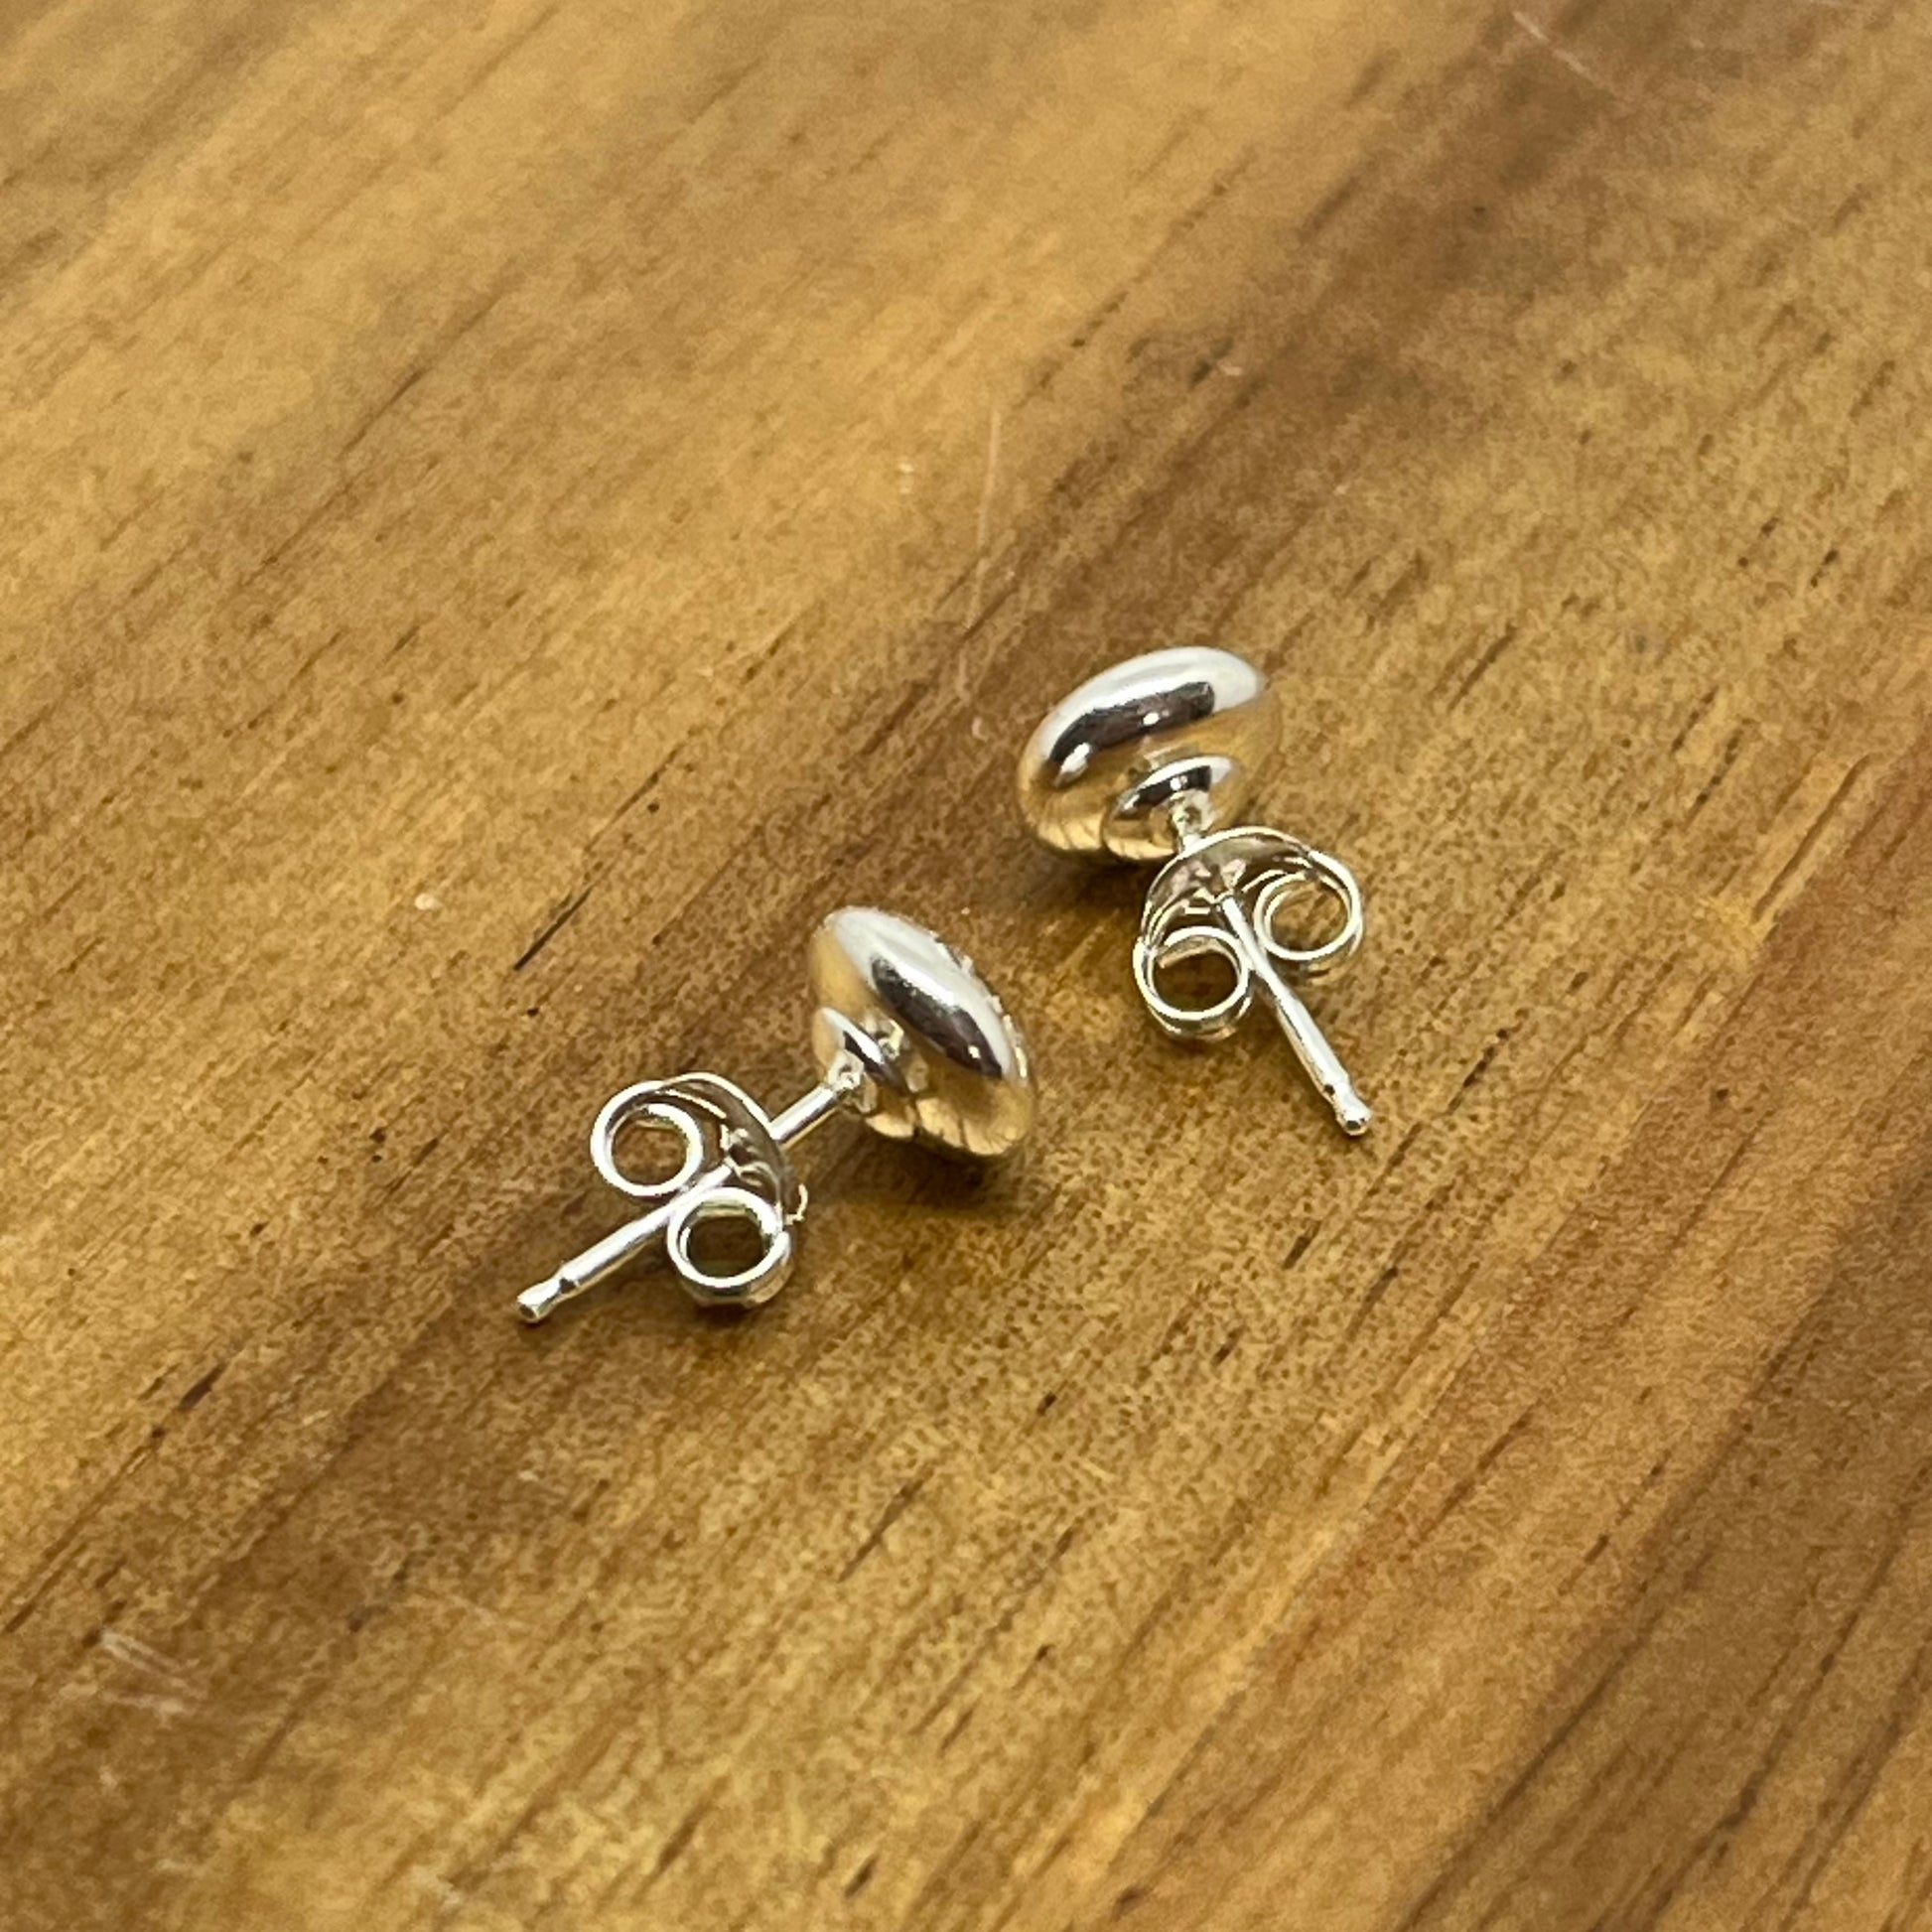 Sterling silver 9mm flat head studs with sterling silver backs